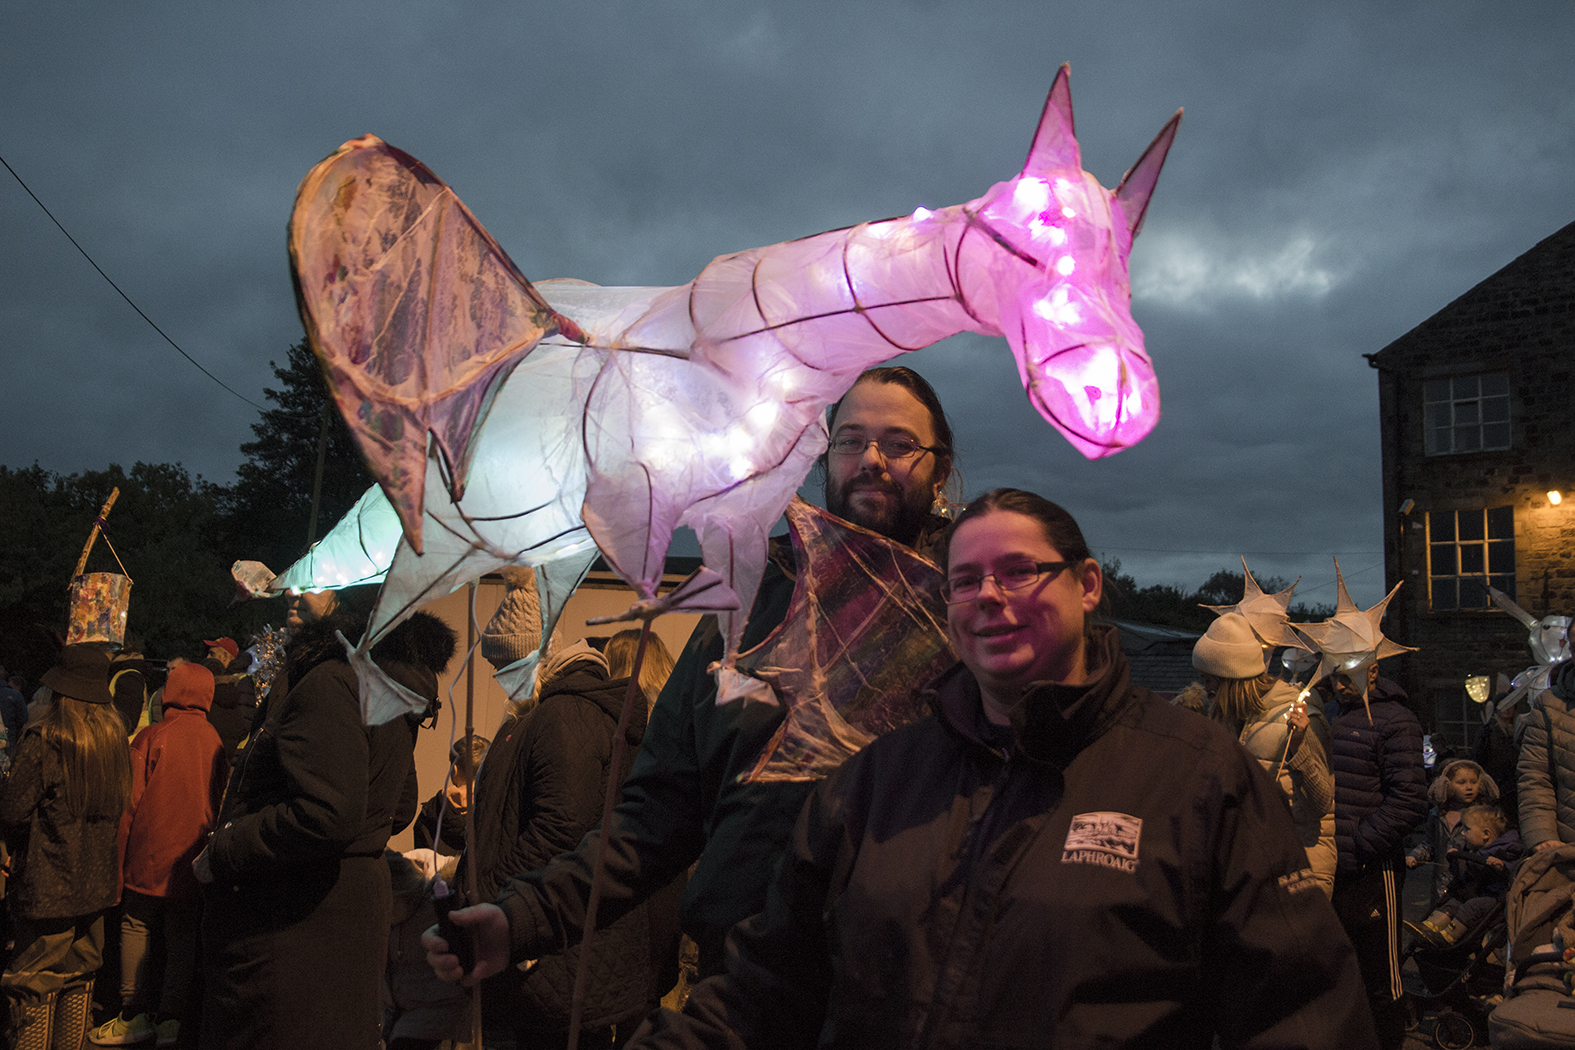 paper lantern of a horse  held up by two people